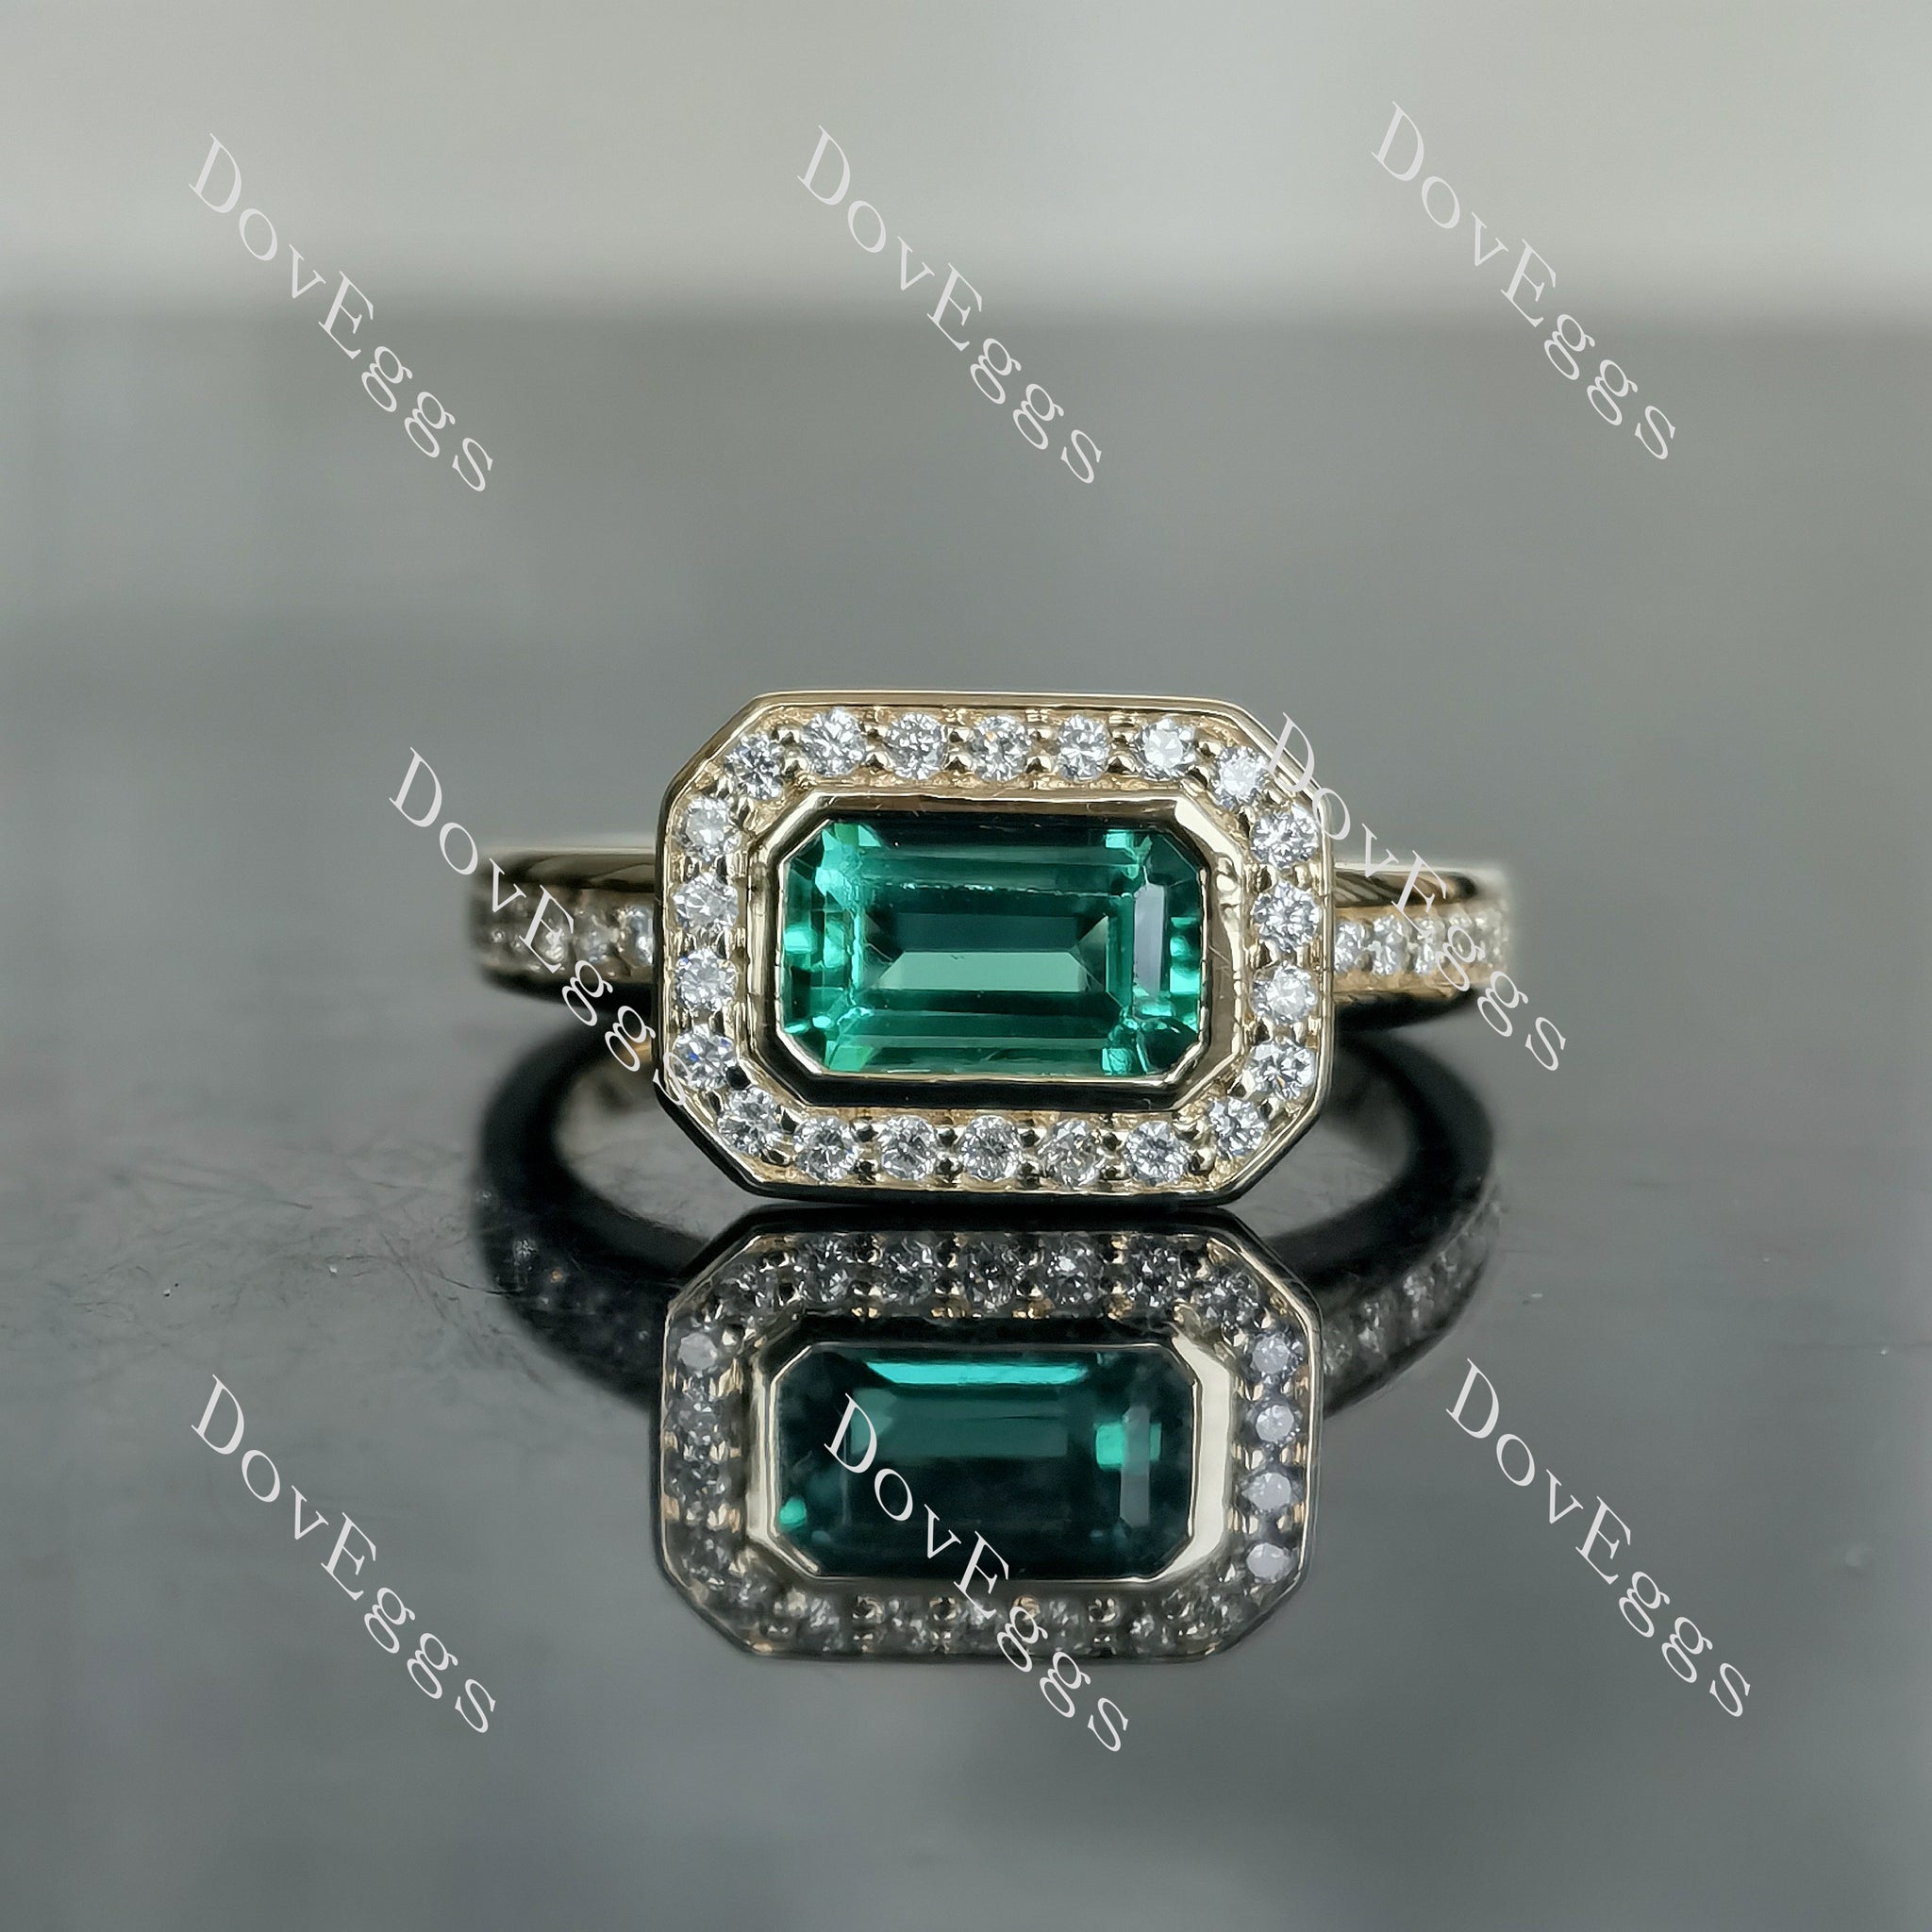 Doveggs elongated emerald halo colored gem engagement ring